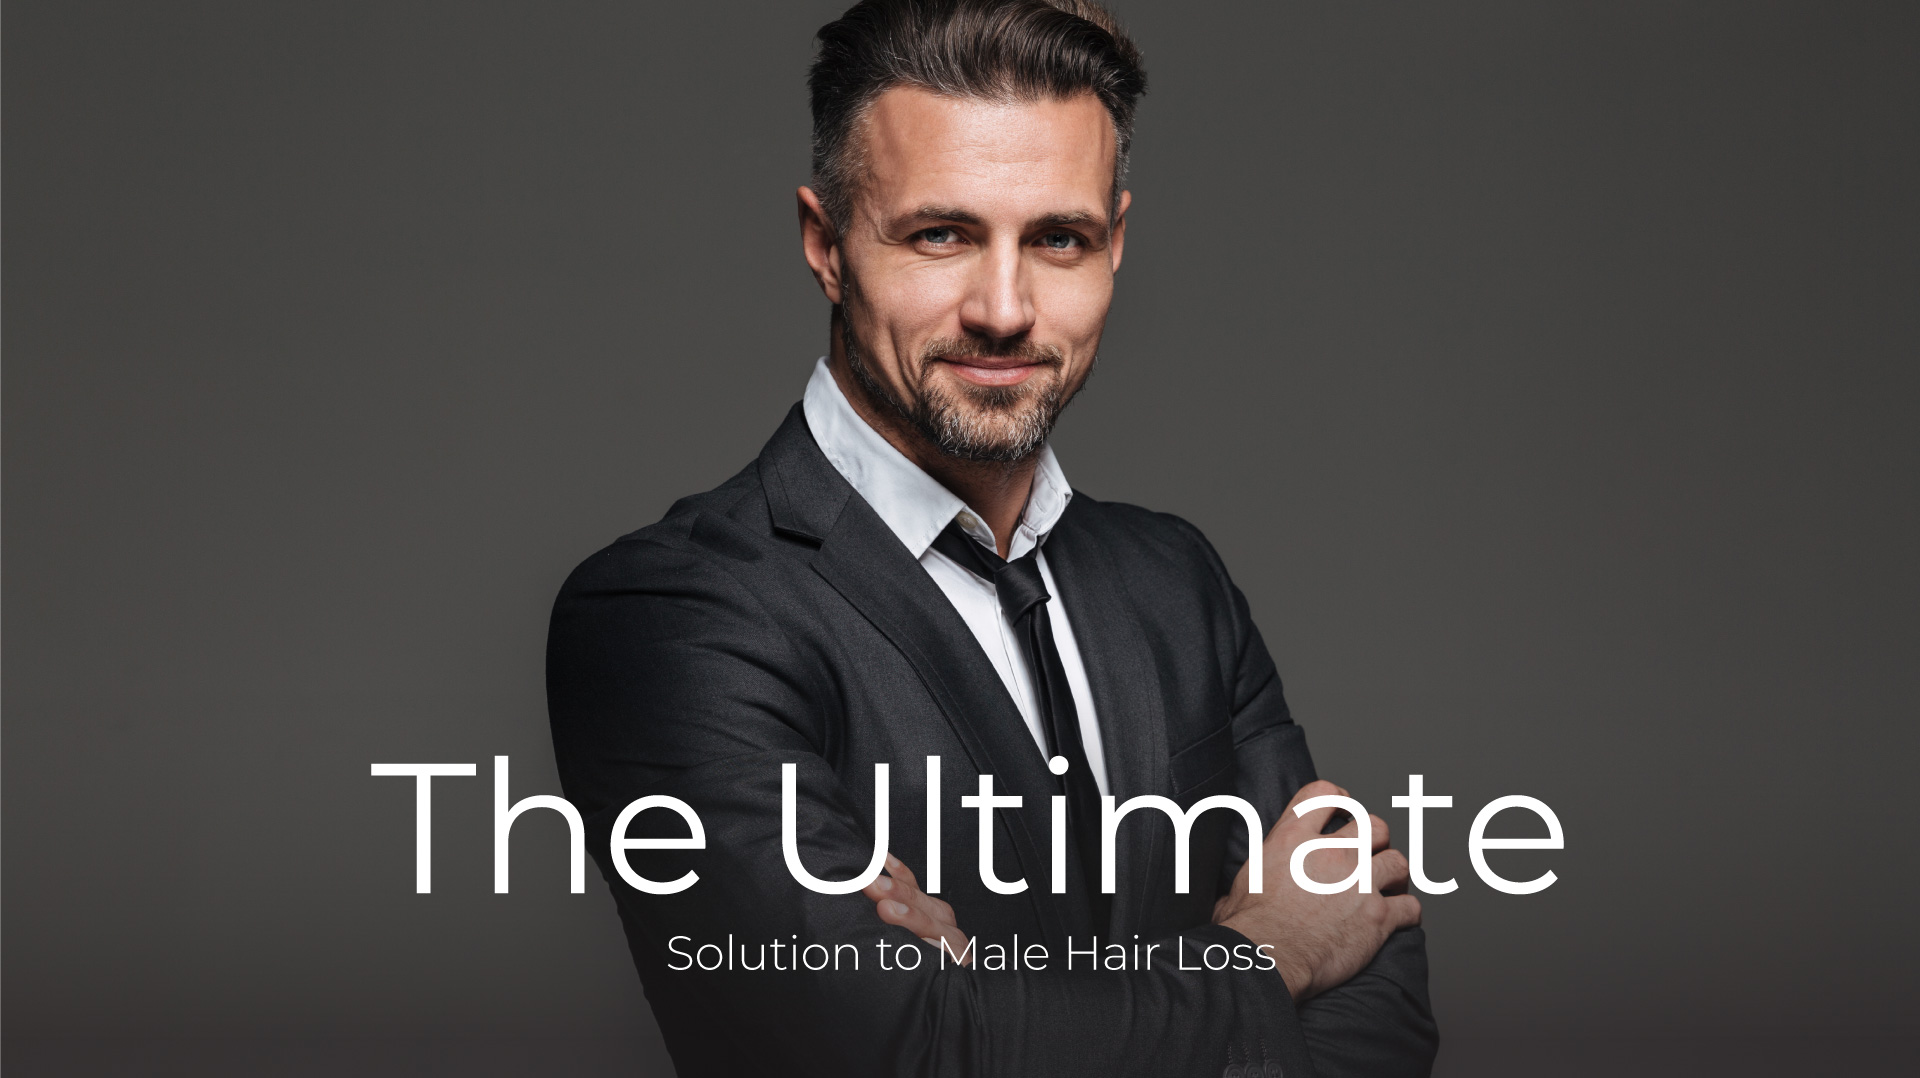 Men's Human Hair Systems, Toupee & Hair Pieces for Men - Superhairpieces